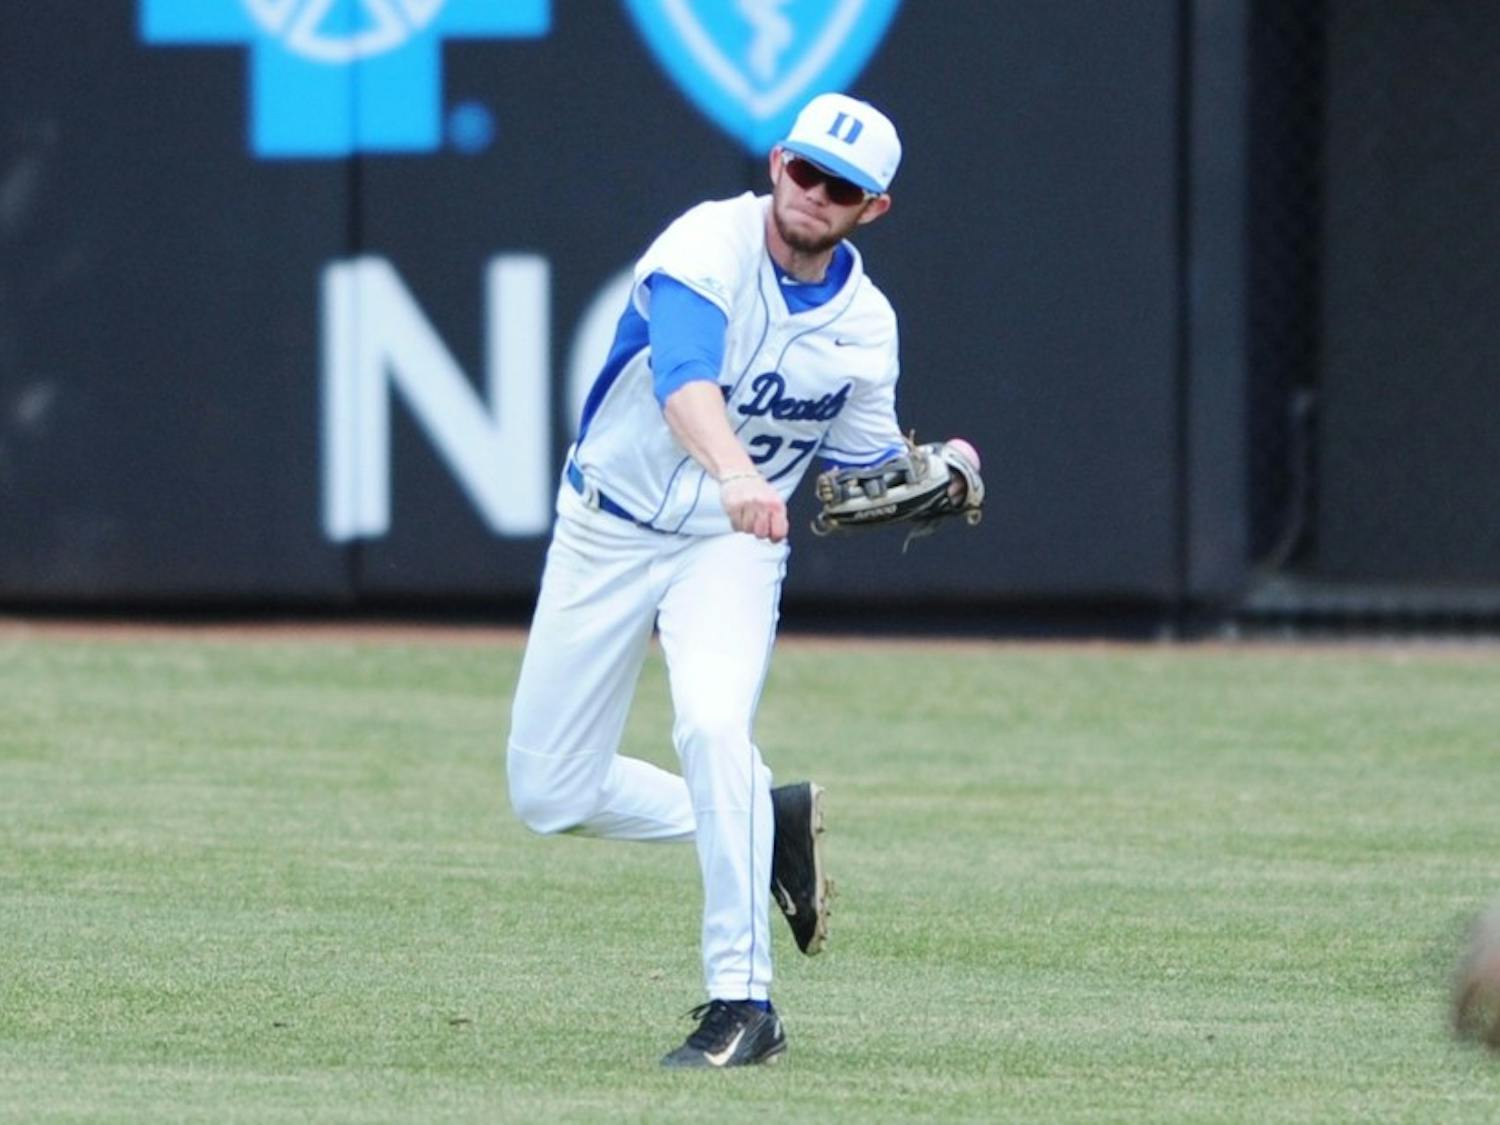 Sophomore Evan Dougherty launched the first three home runs of his career Friday as the Blue Devils used the long ball to beat Ohio State 8-1 for their fourth straight win.